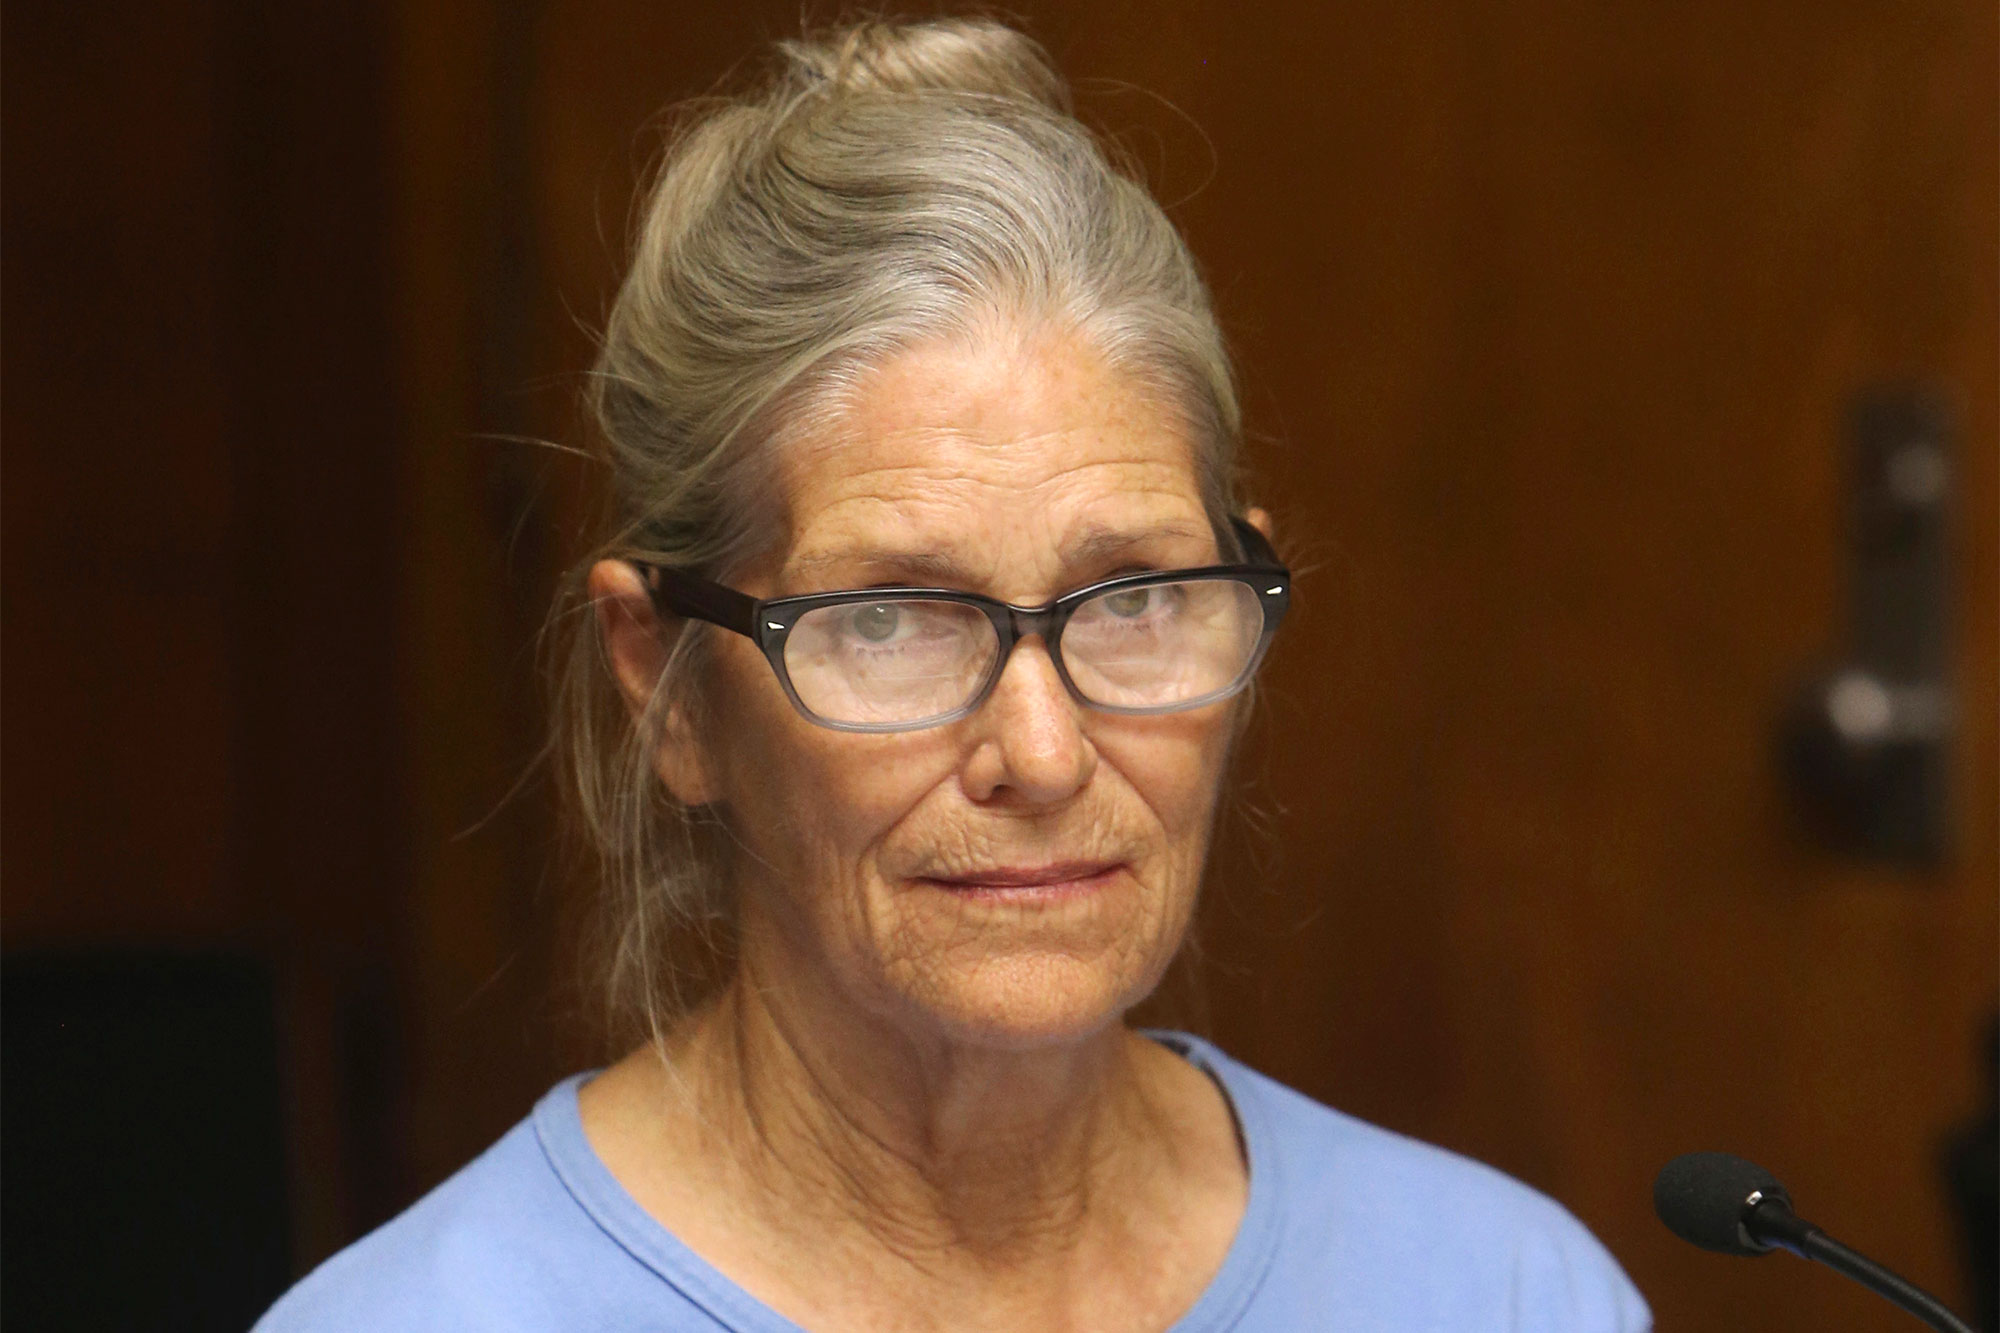 Officials have advocated for Leslie Van Houten’s release from a California prison, where she was sentenced to life.